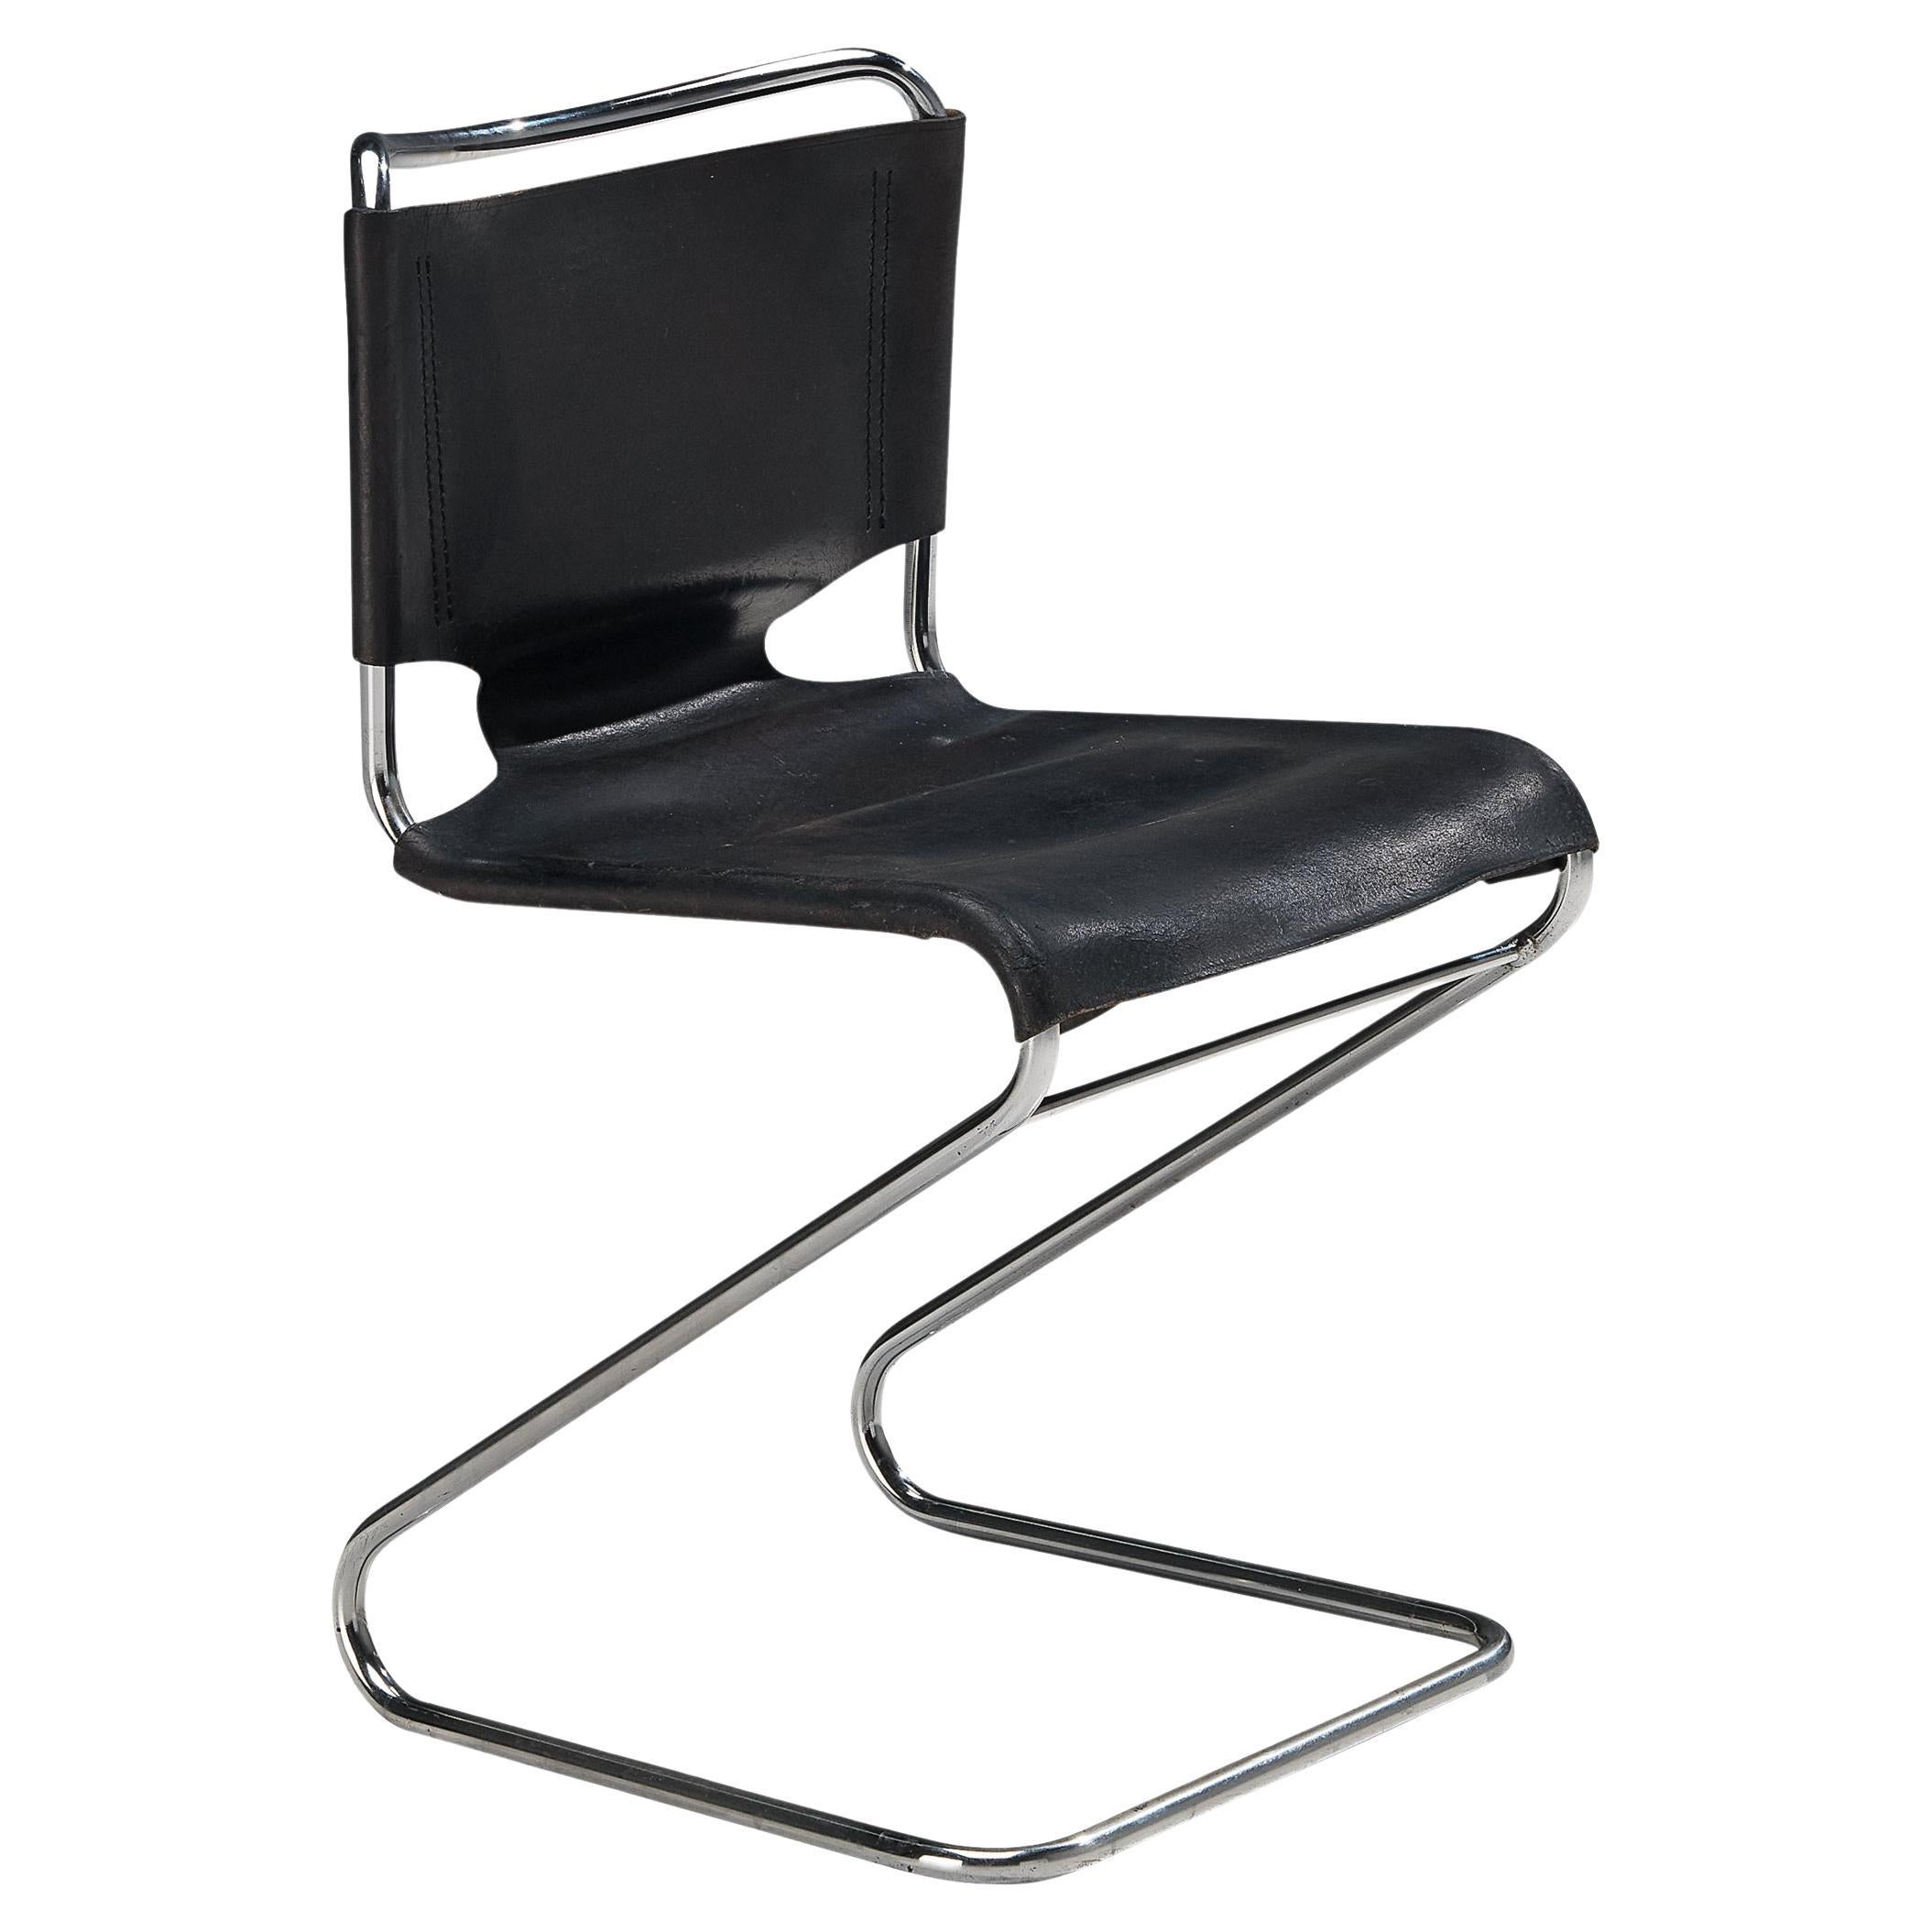 Pascal Mourgue 'Biscia' Chair in Black Saddle Leather 